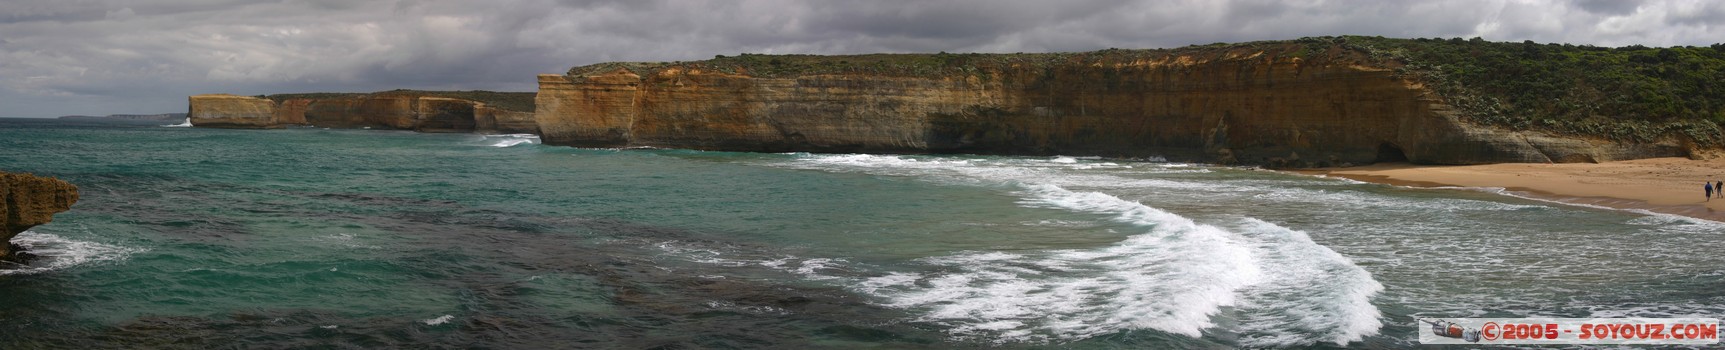 Great Ocean Road - Loch Ard Gorge - panorama
Mots-clés: panorama